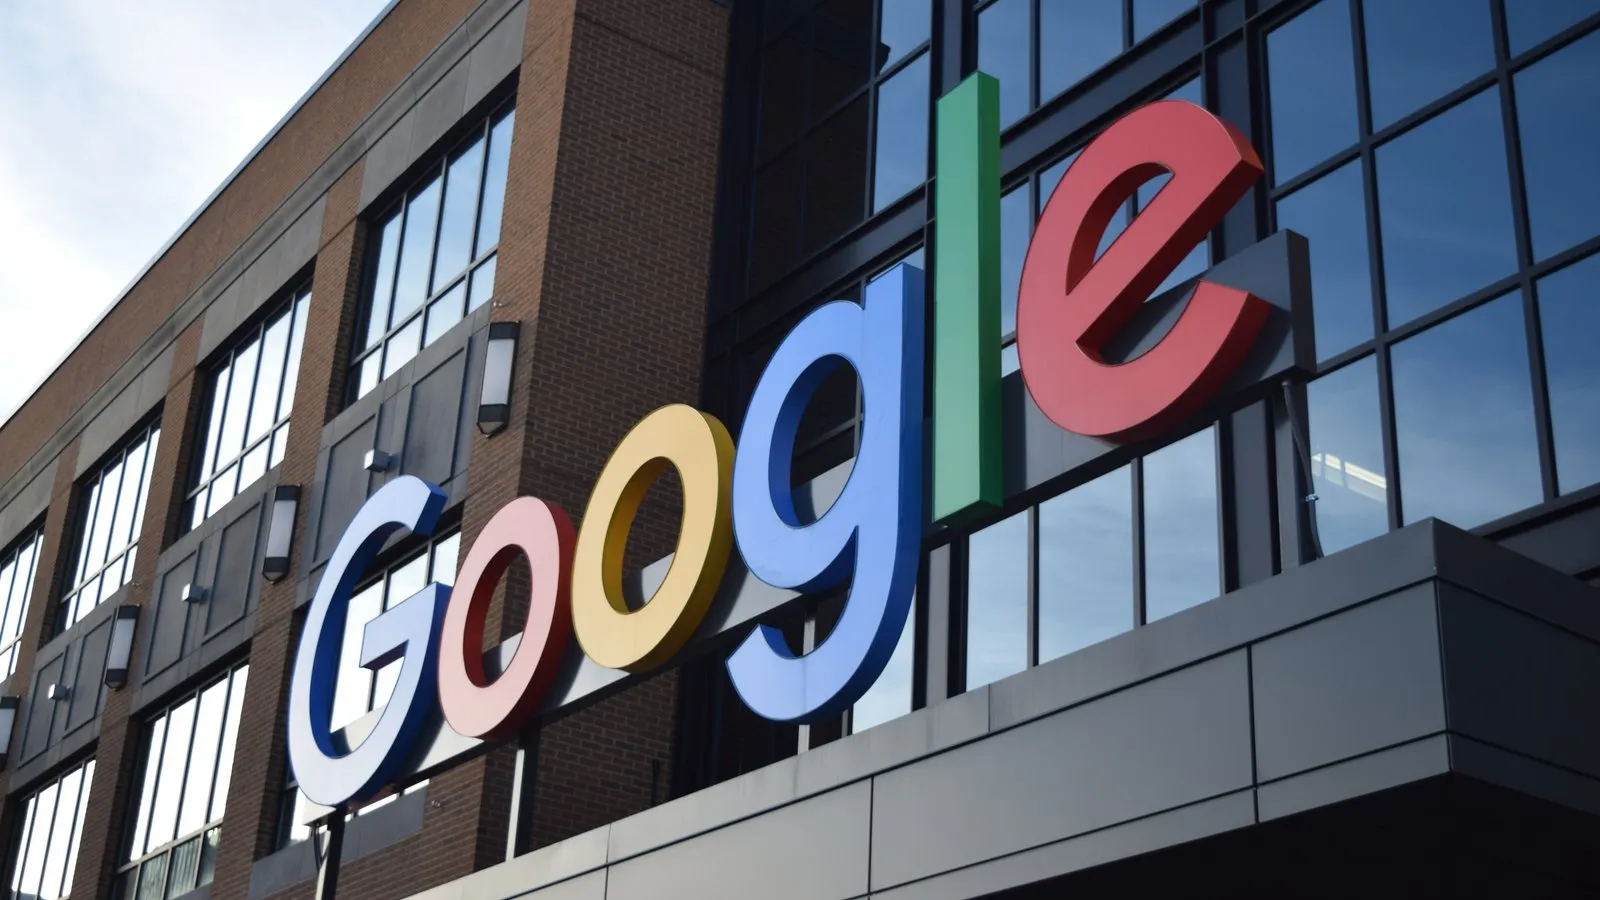 Google Messages, may soon feature end-to-end encryption. Image: Shutterstock